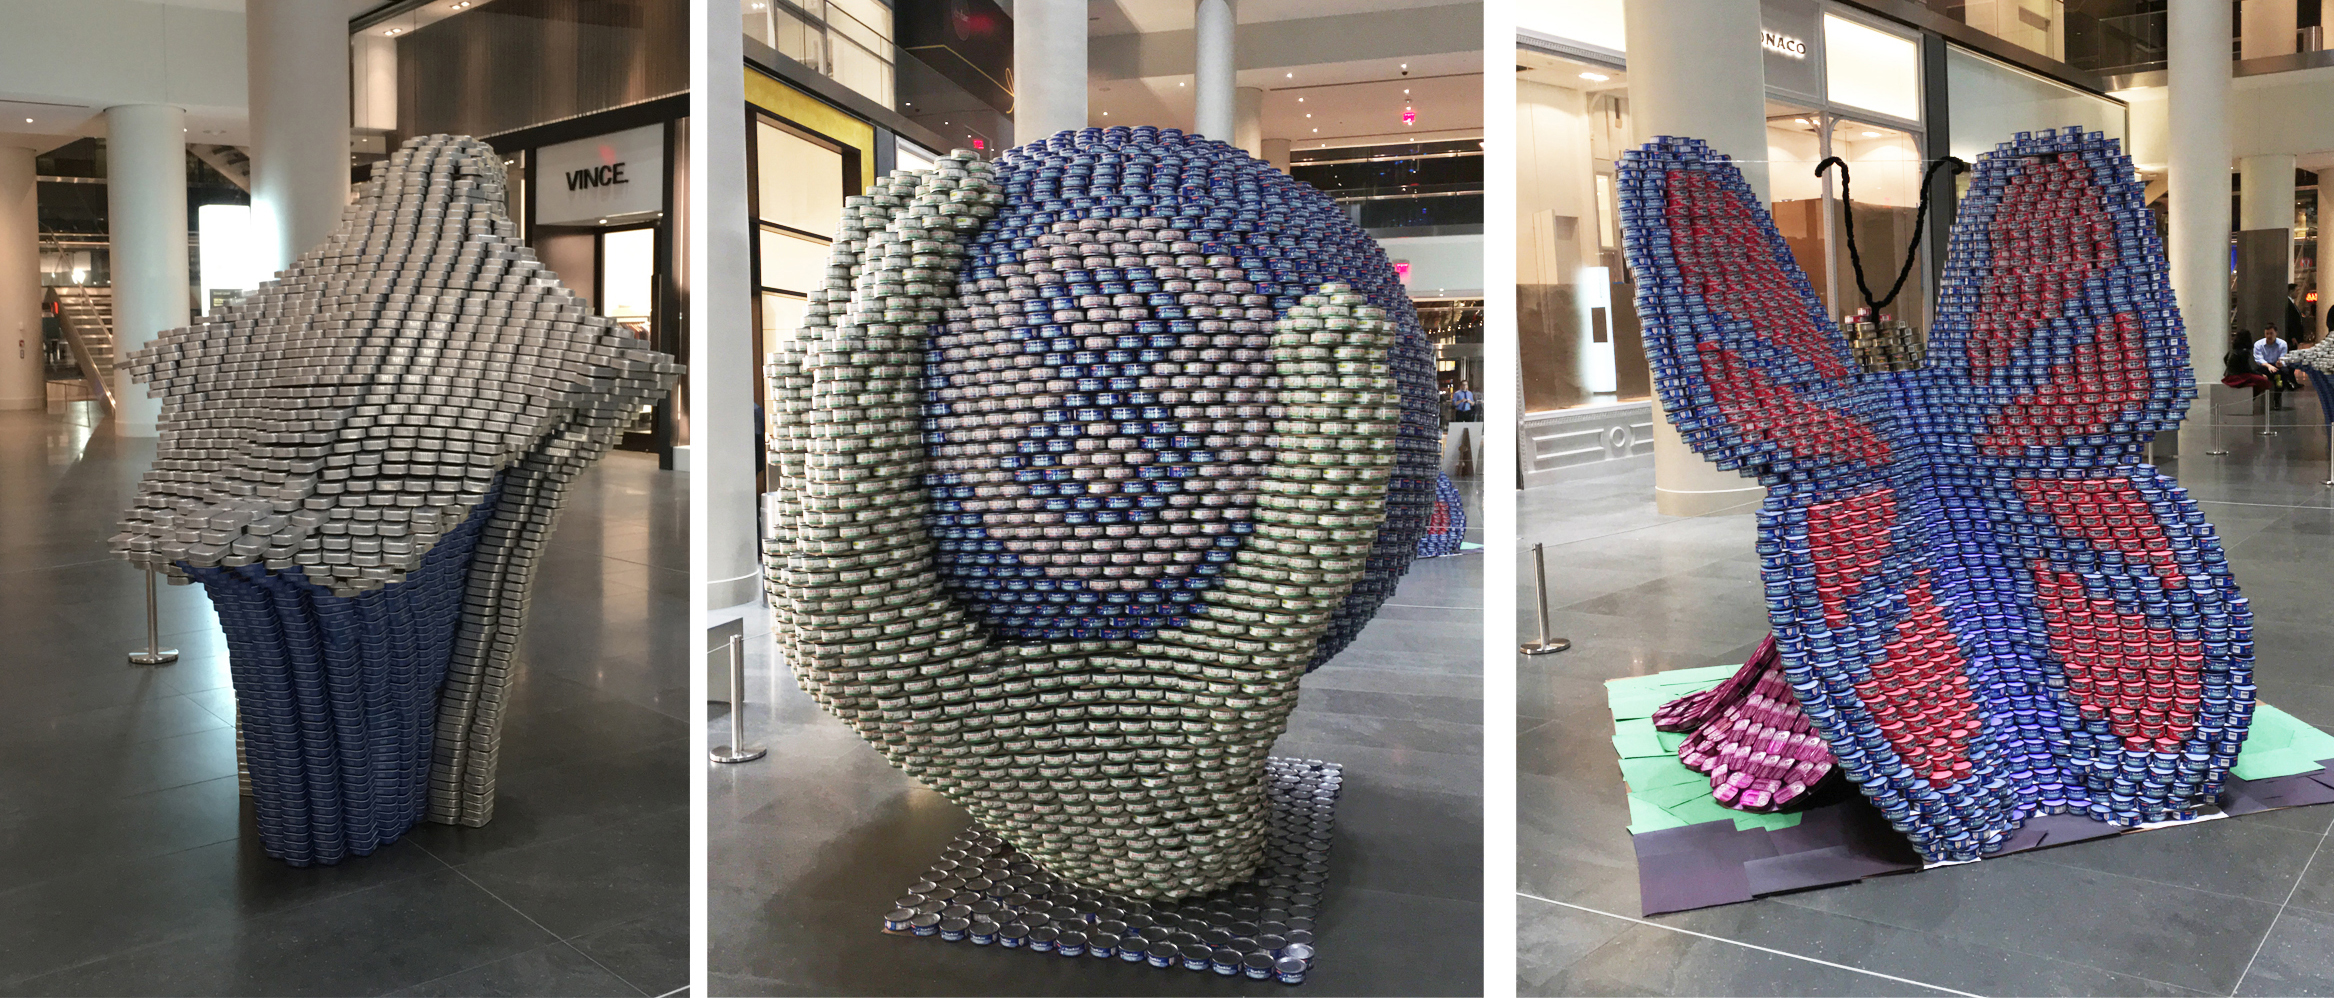 Canstruction 2015